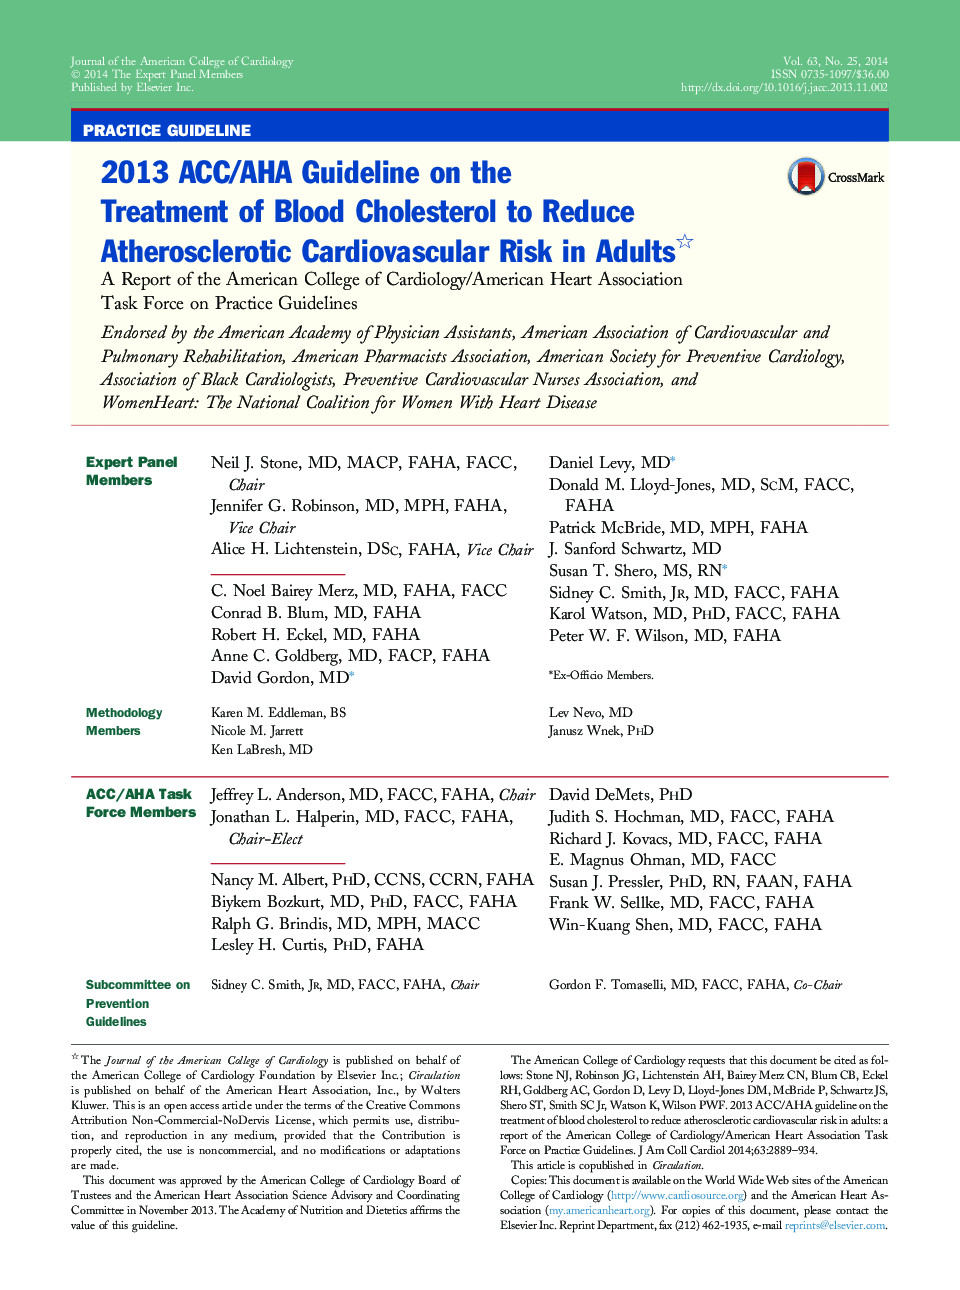 2013 ACC/AHA Guideline on the Treatment of Blood Cholesterol to Reduce Atherosclerotic Cardiovascular Risk in Adults